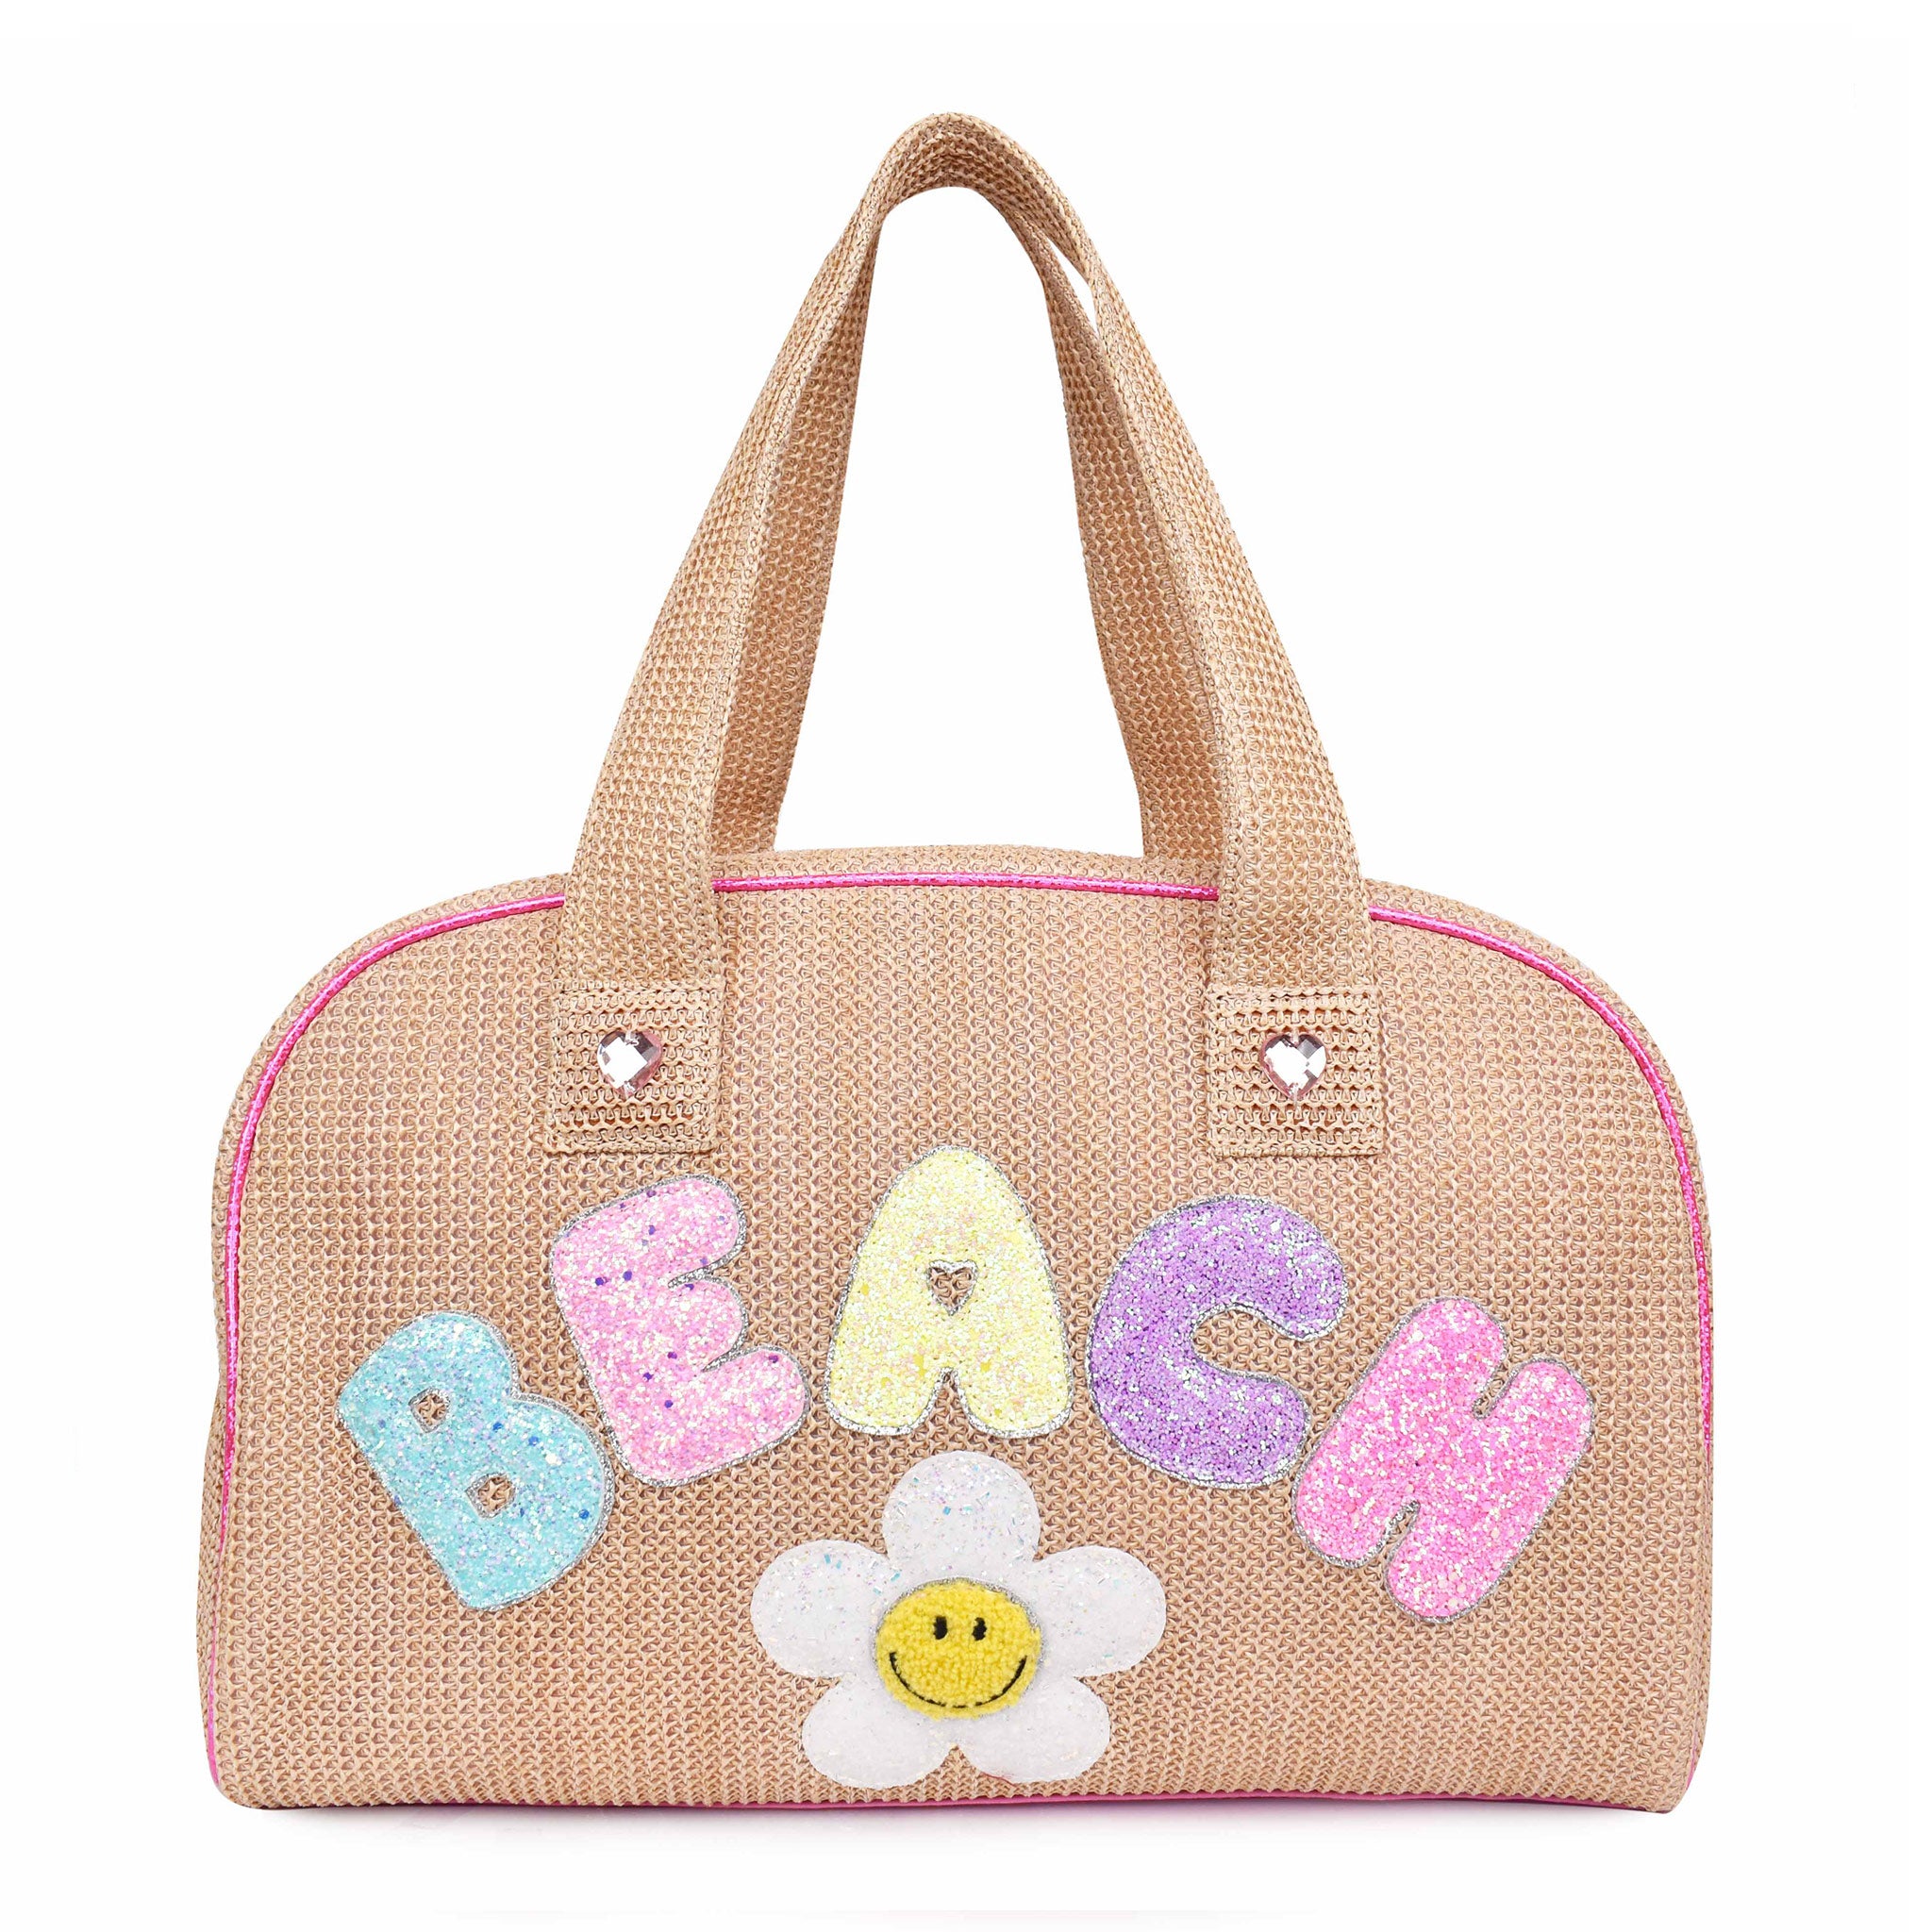 Front view of a straw medium duffle bag embellished with glitter bubble letters 'BEACH' and smiley face daisy appliqués 